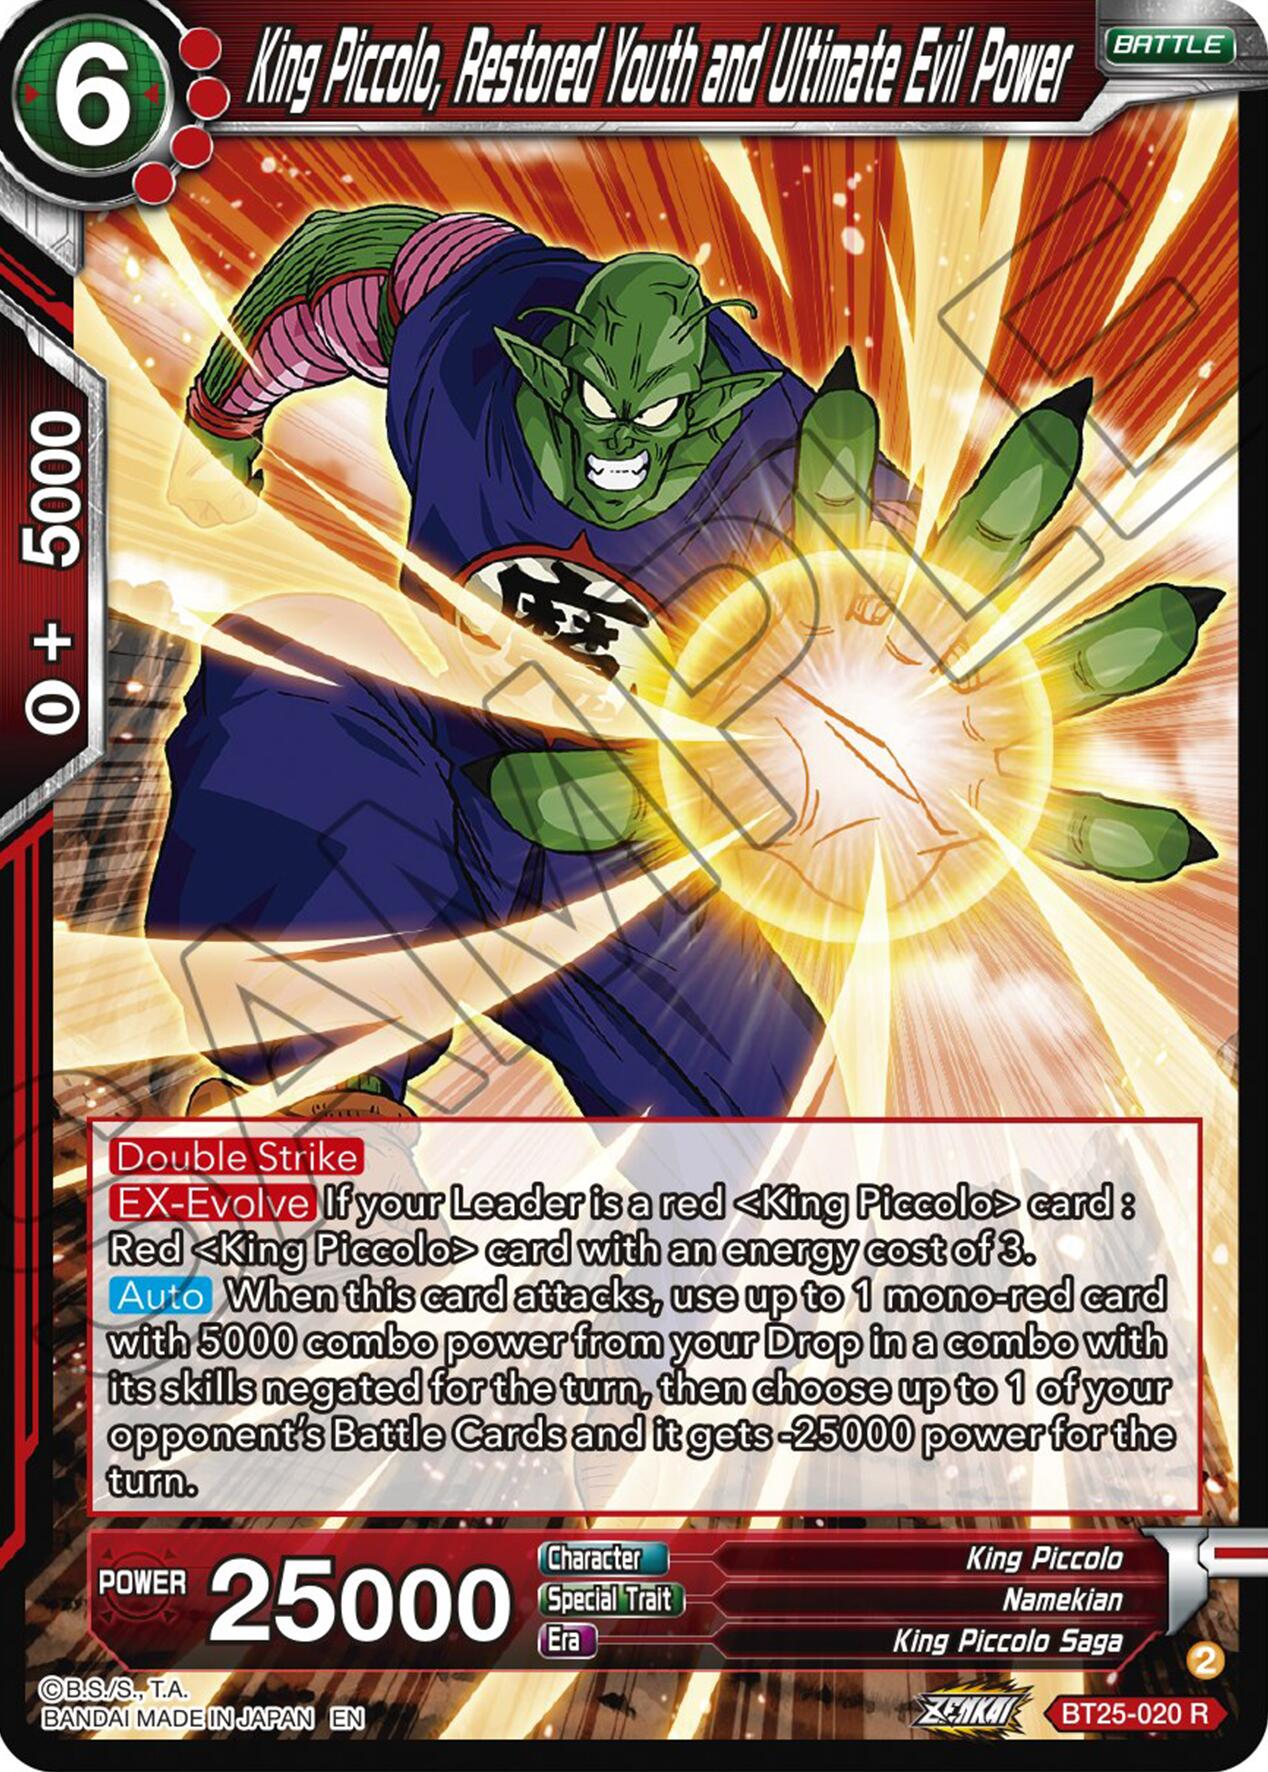 King Piccolo, Restored Youth and Ultimate Evil Power (BT25-020) [Legend of the Dragon Balls] | Devastation Store